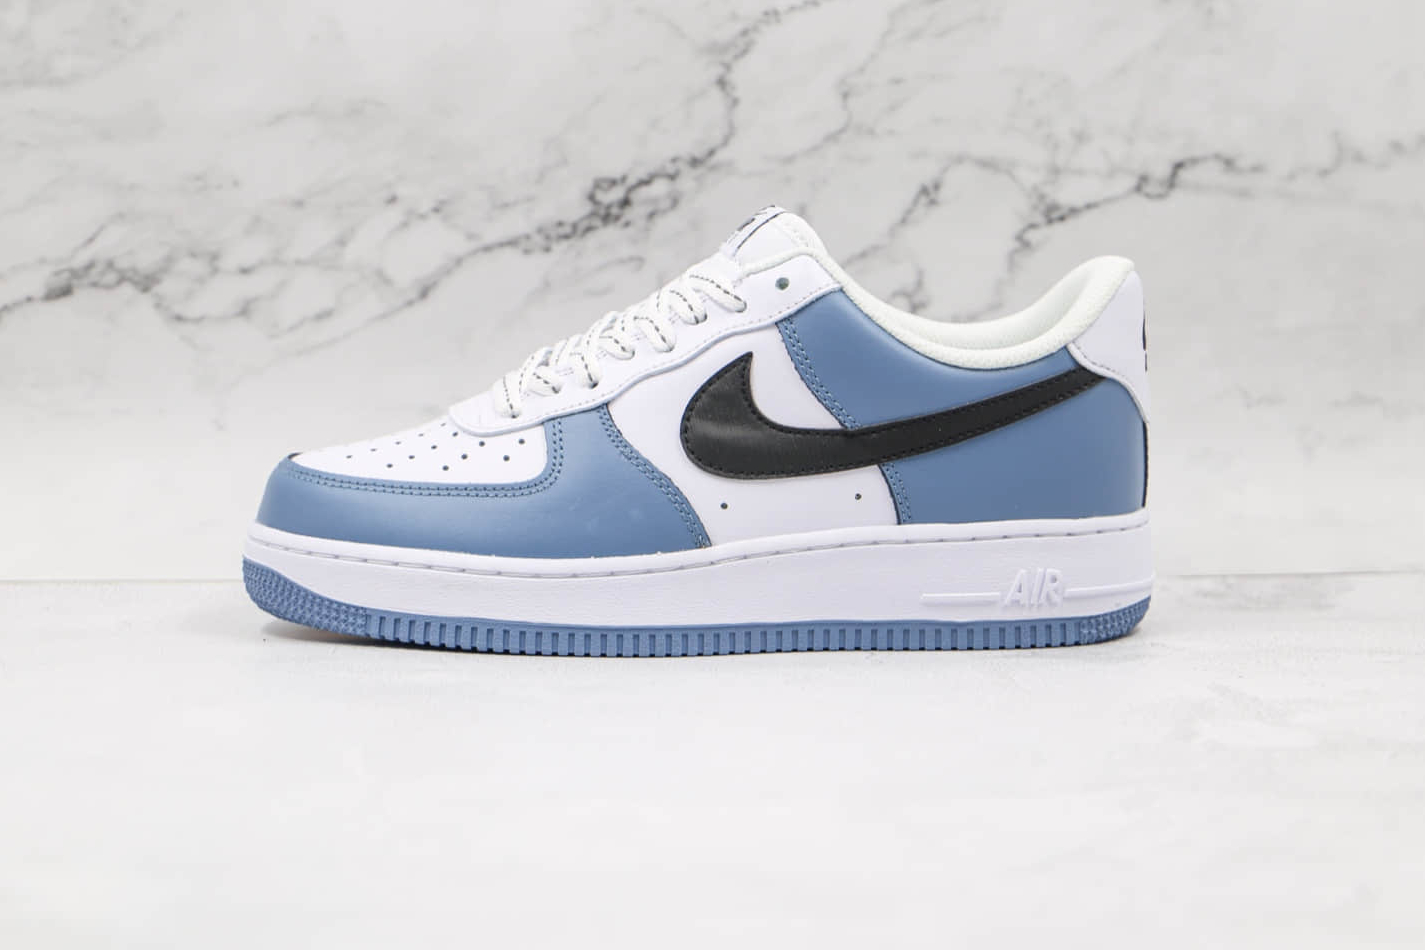 Nike Air Force 1 07 Low White Sky Blue Black CQ5059-109 - Stylish and Versatile Sneakers